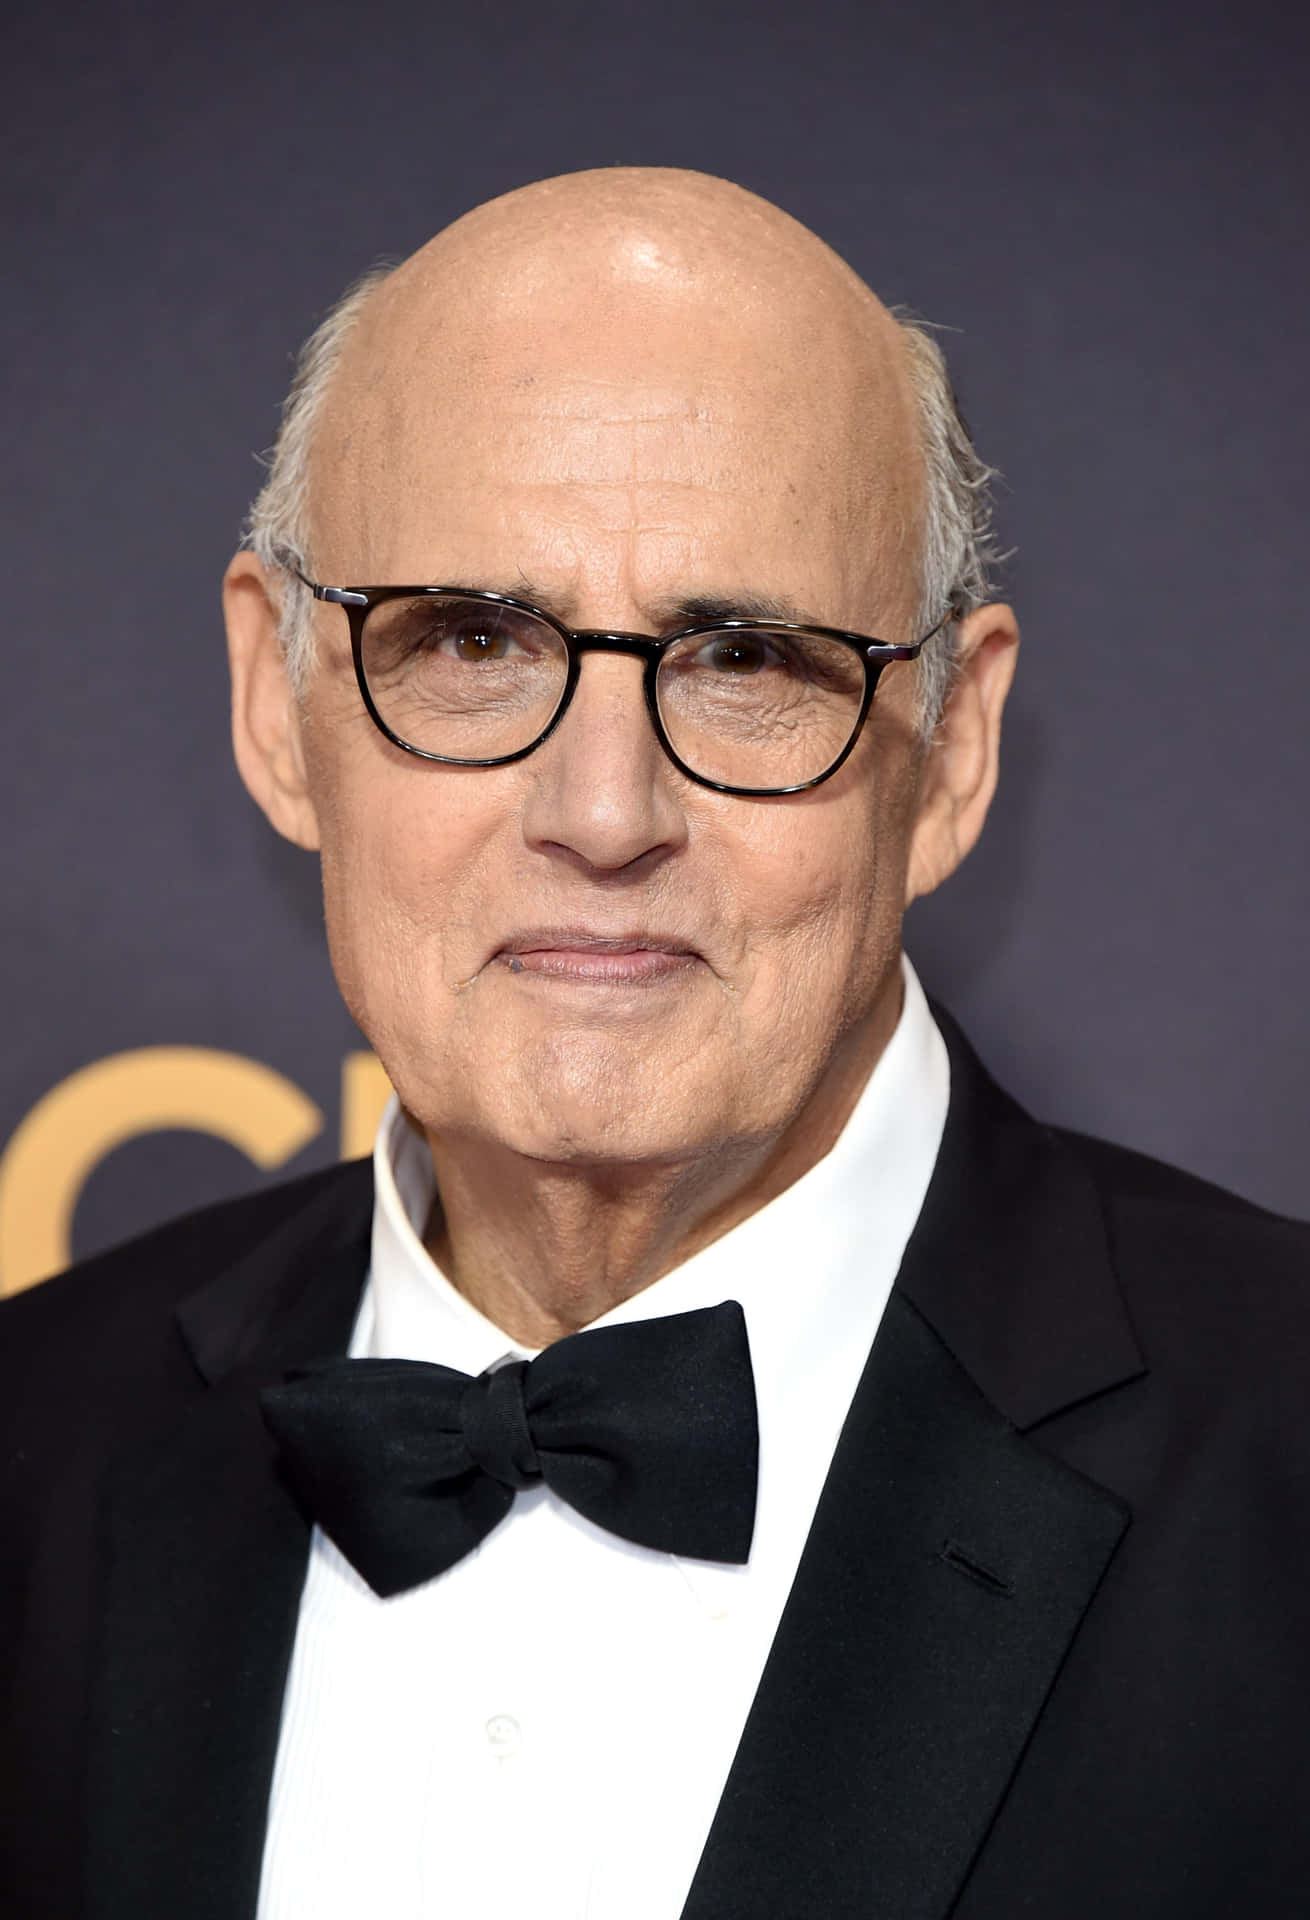 Jeffreytambor Is An Actor Best Known For His Role In The Television Series 